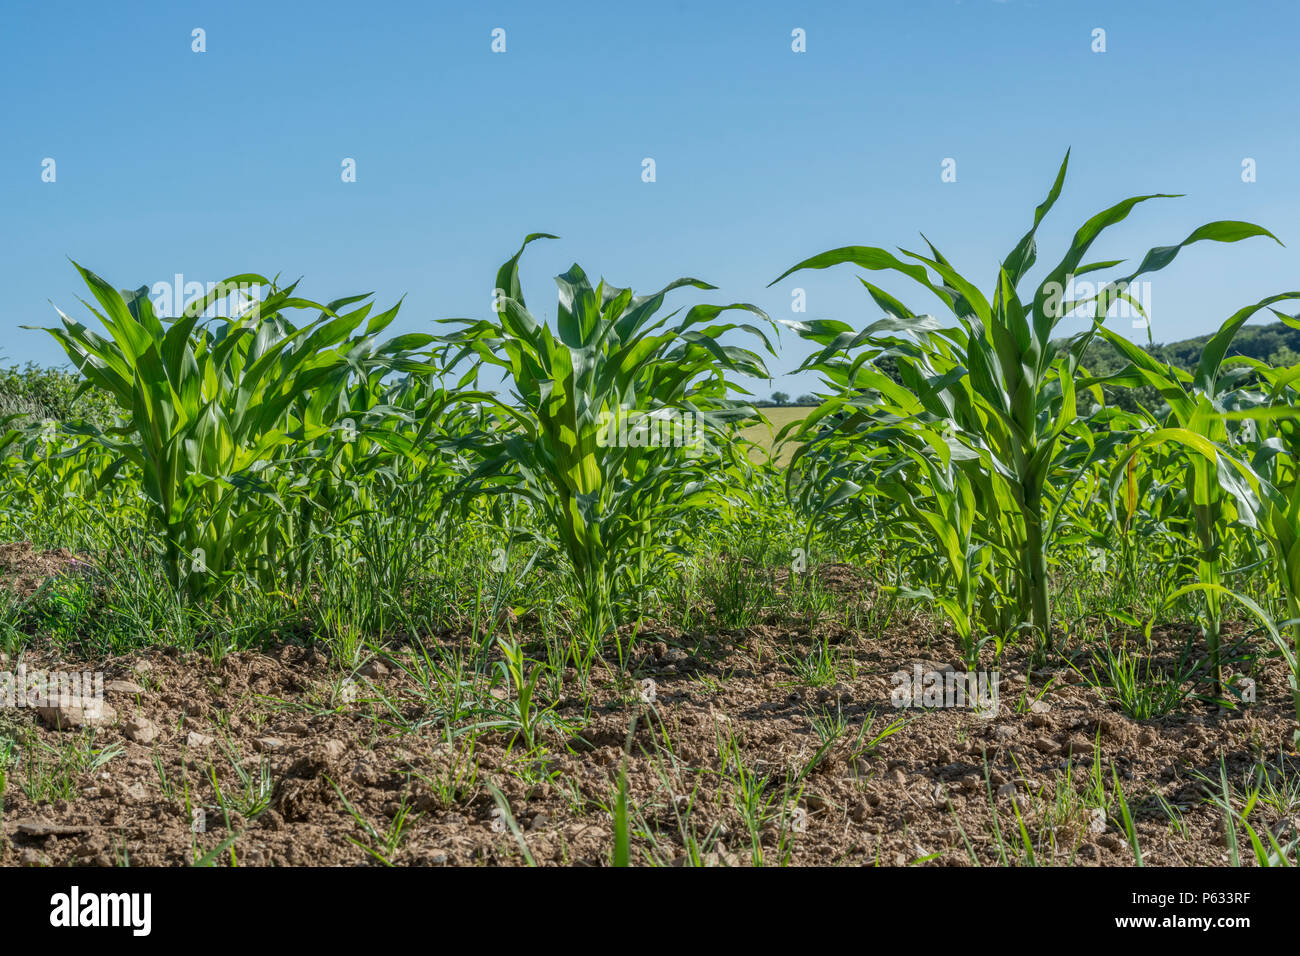 Young maize corn/ Sweetcorn / Zea mays crop growing in field with blue summer sky. Growing sweetcorn in the UK, food growing in the field. Stock Photo